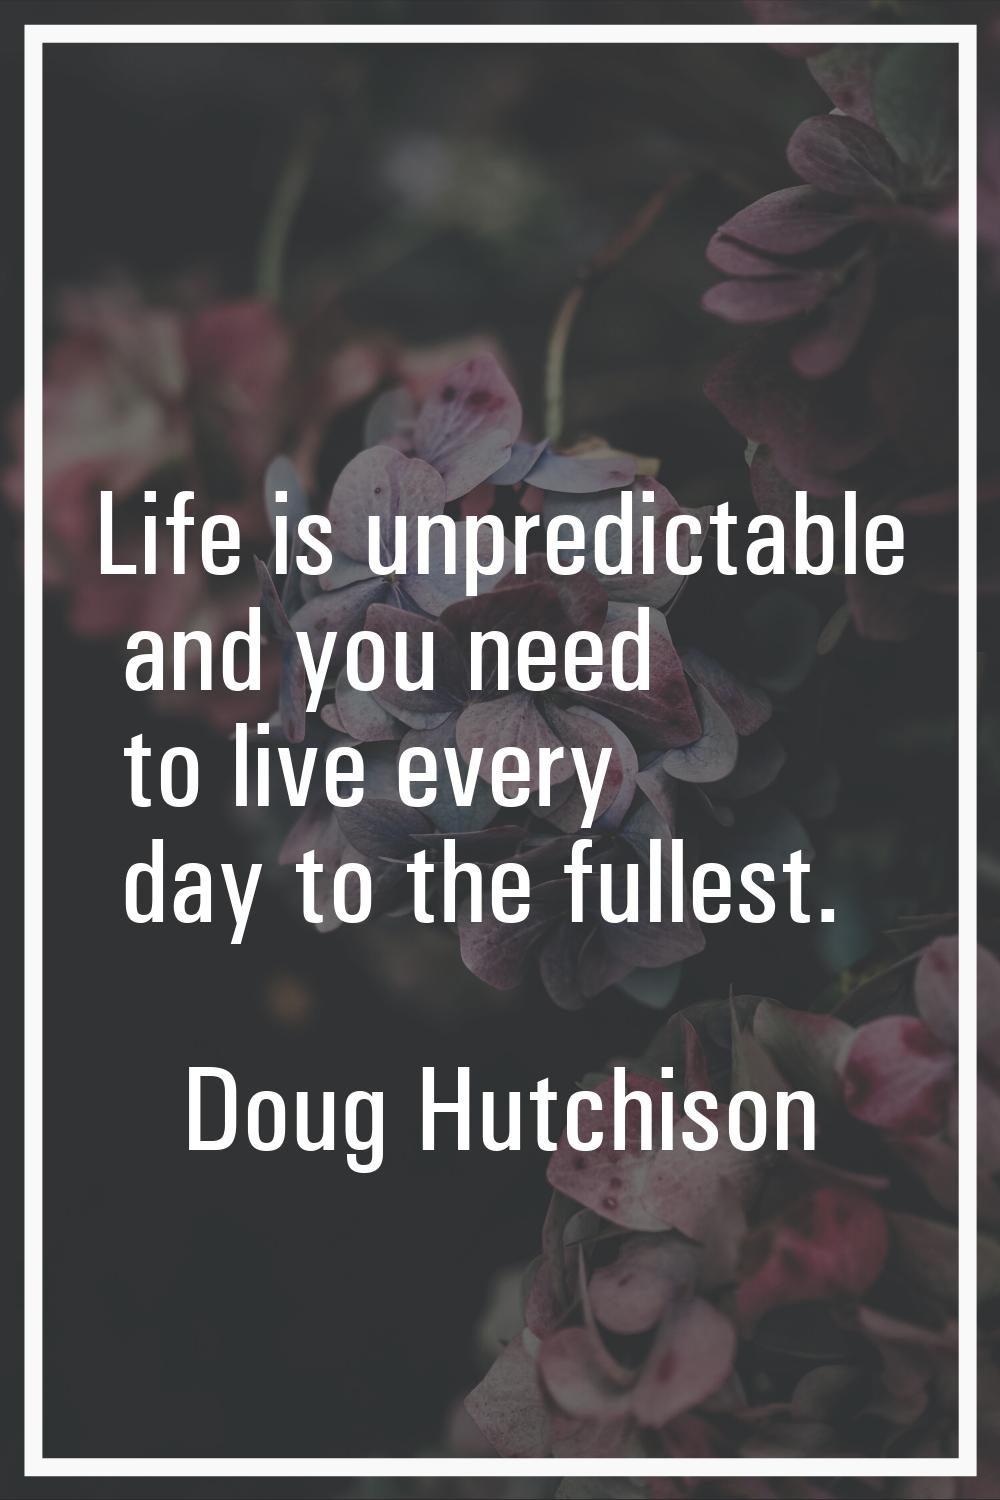 Life is unpredictable and you need to live every day to the fullest.